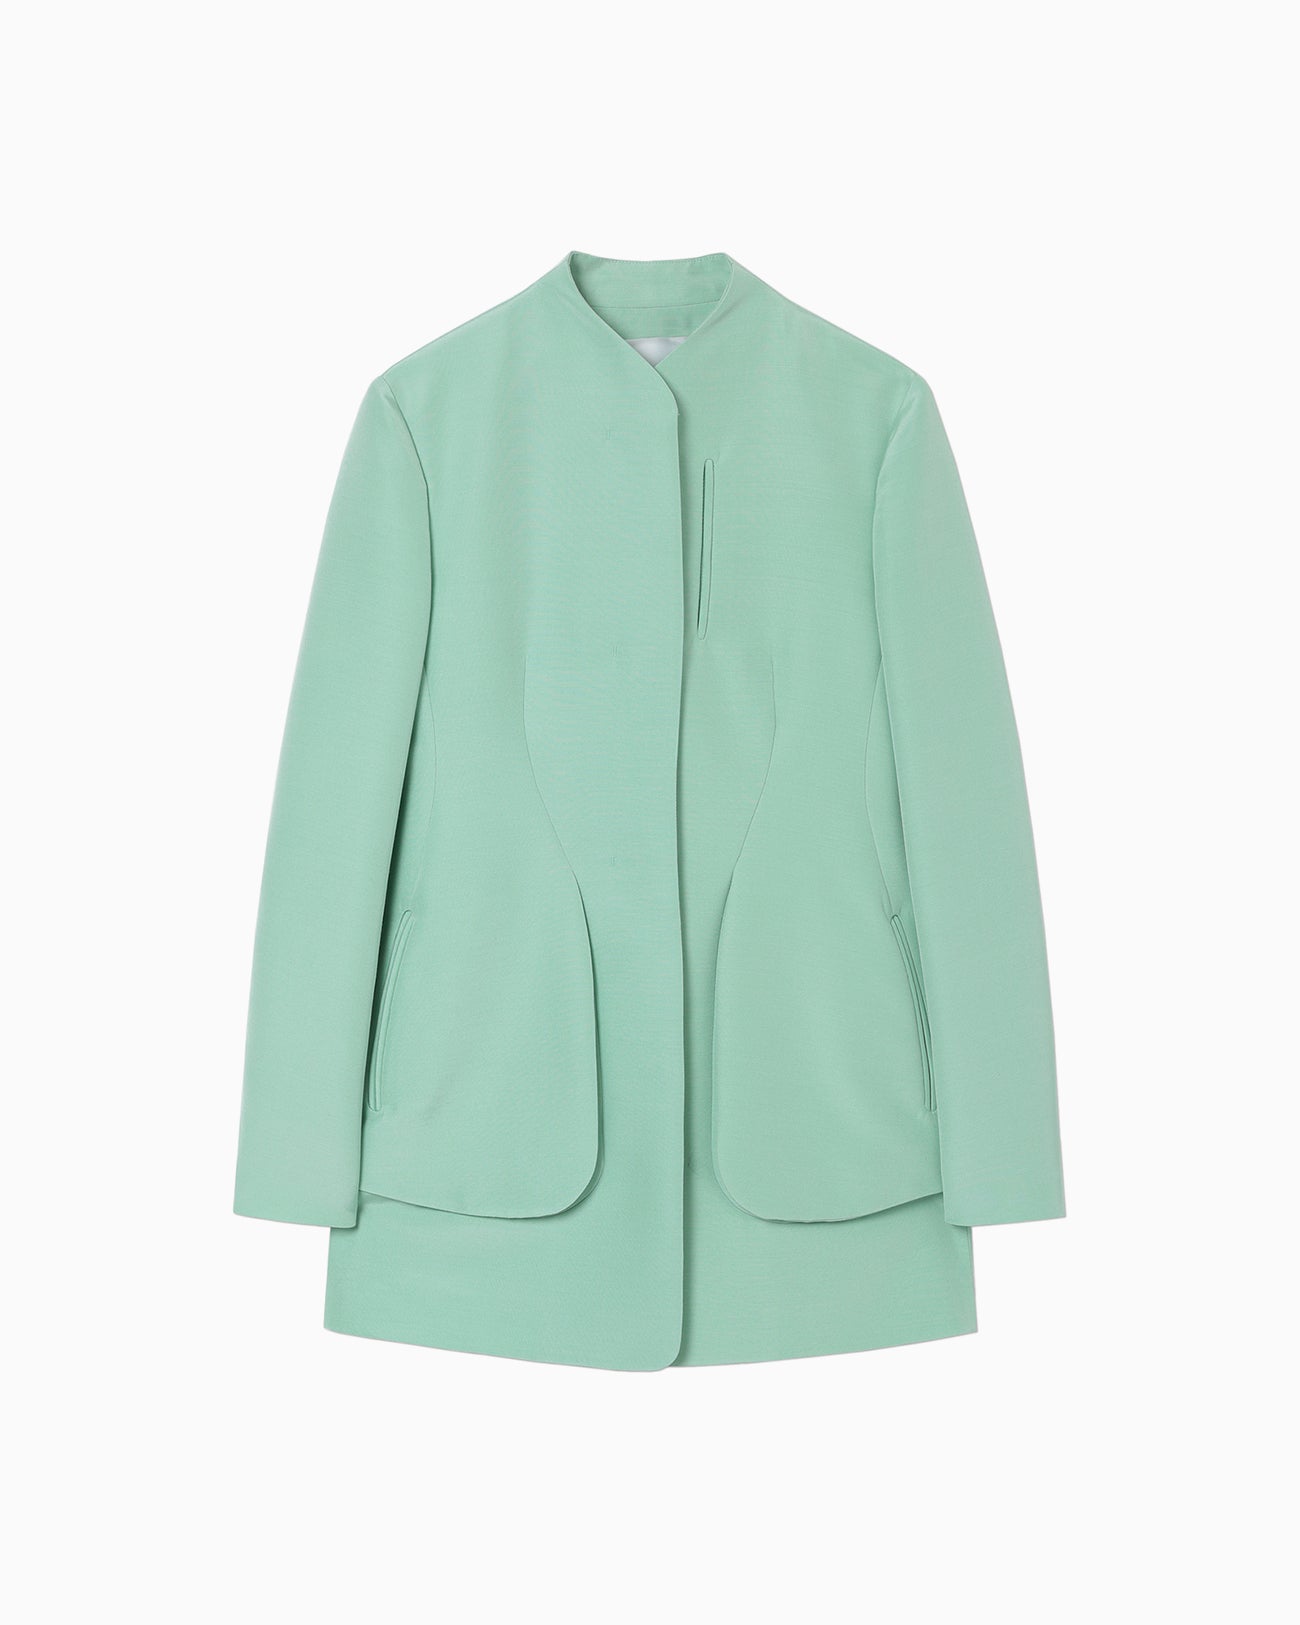 Silk Wool Double Cloth Stand Collar Jacket - mint green